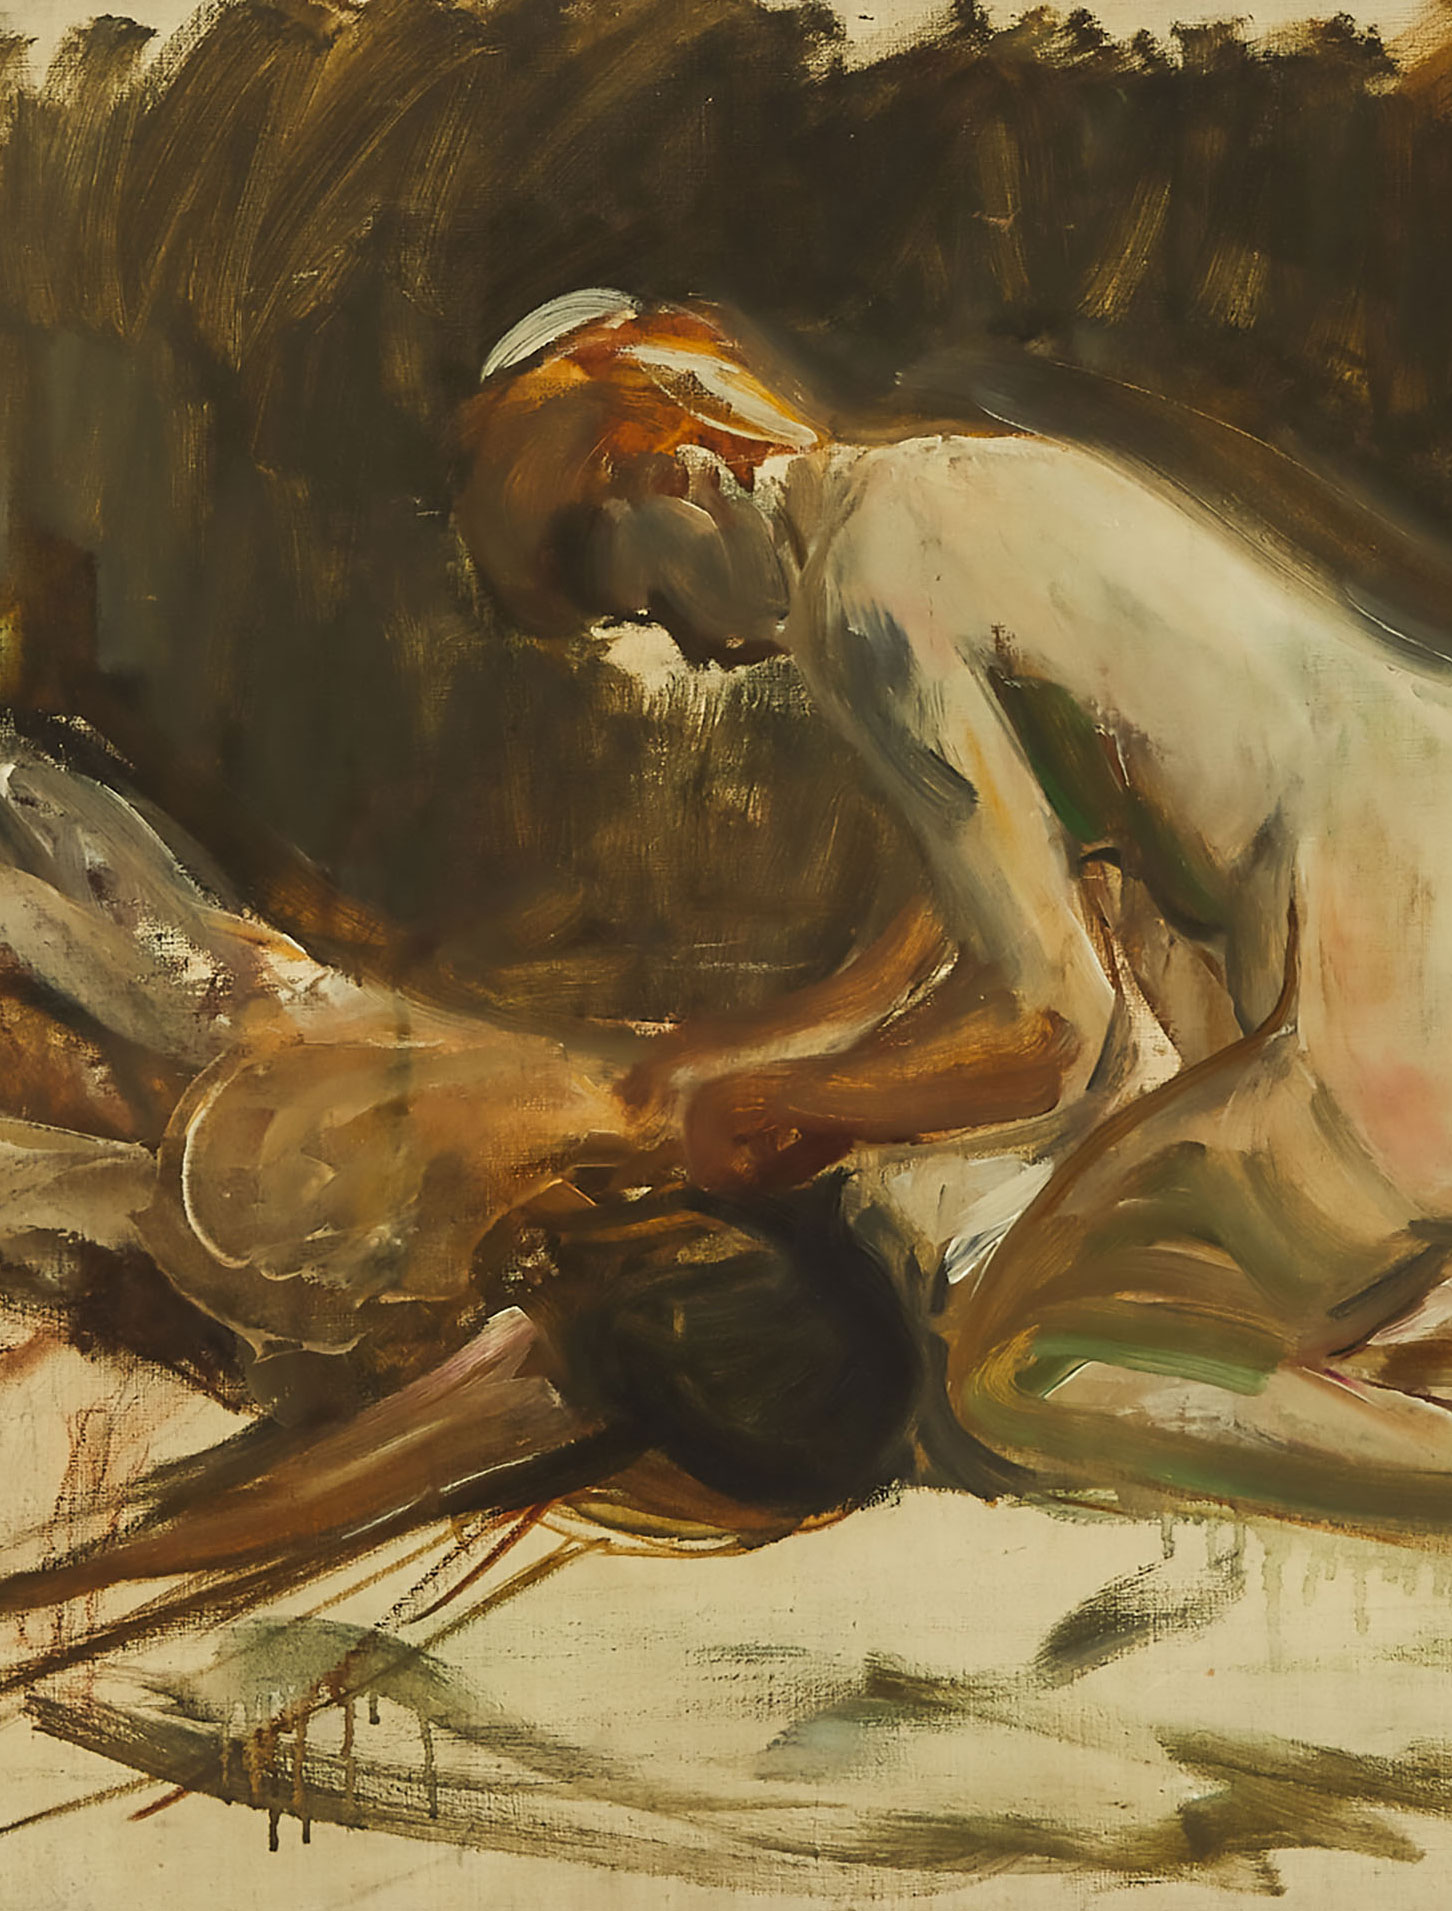 "Samson and Delilah" by Max Liebermann